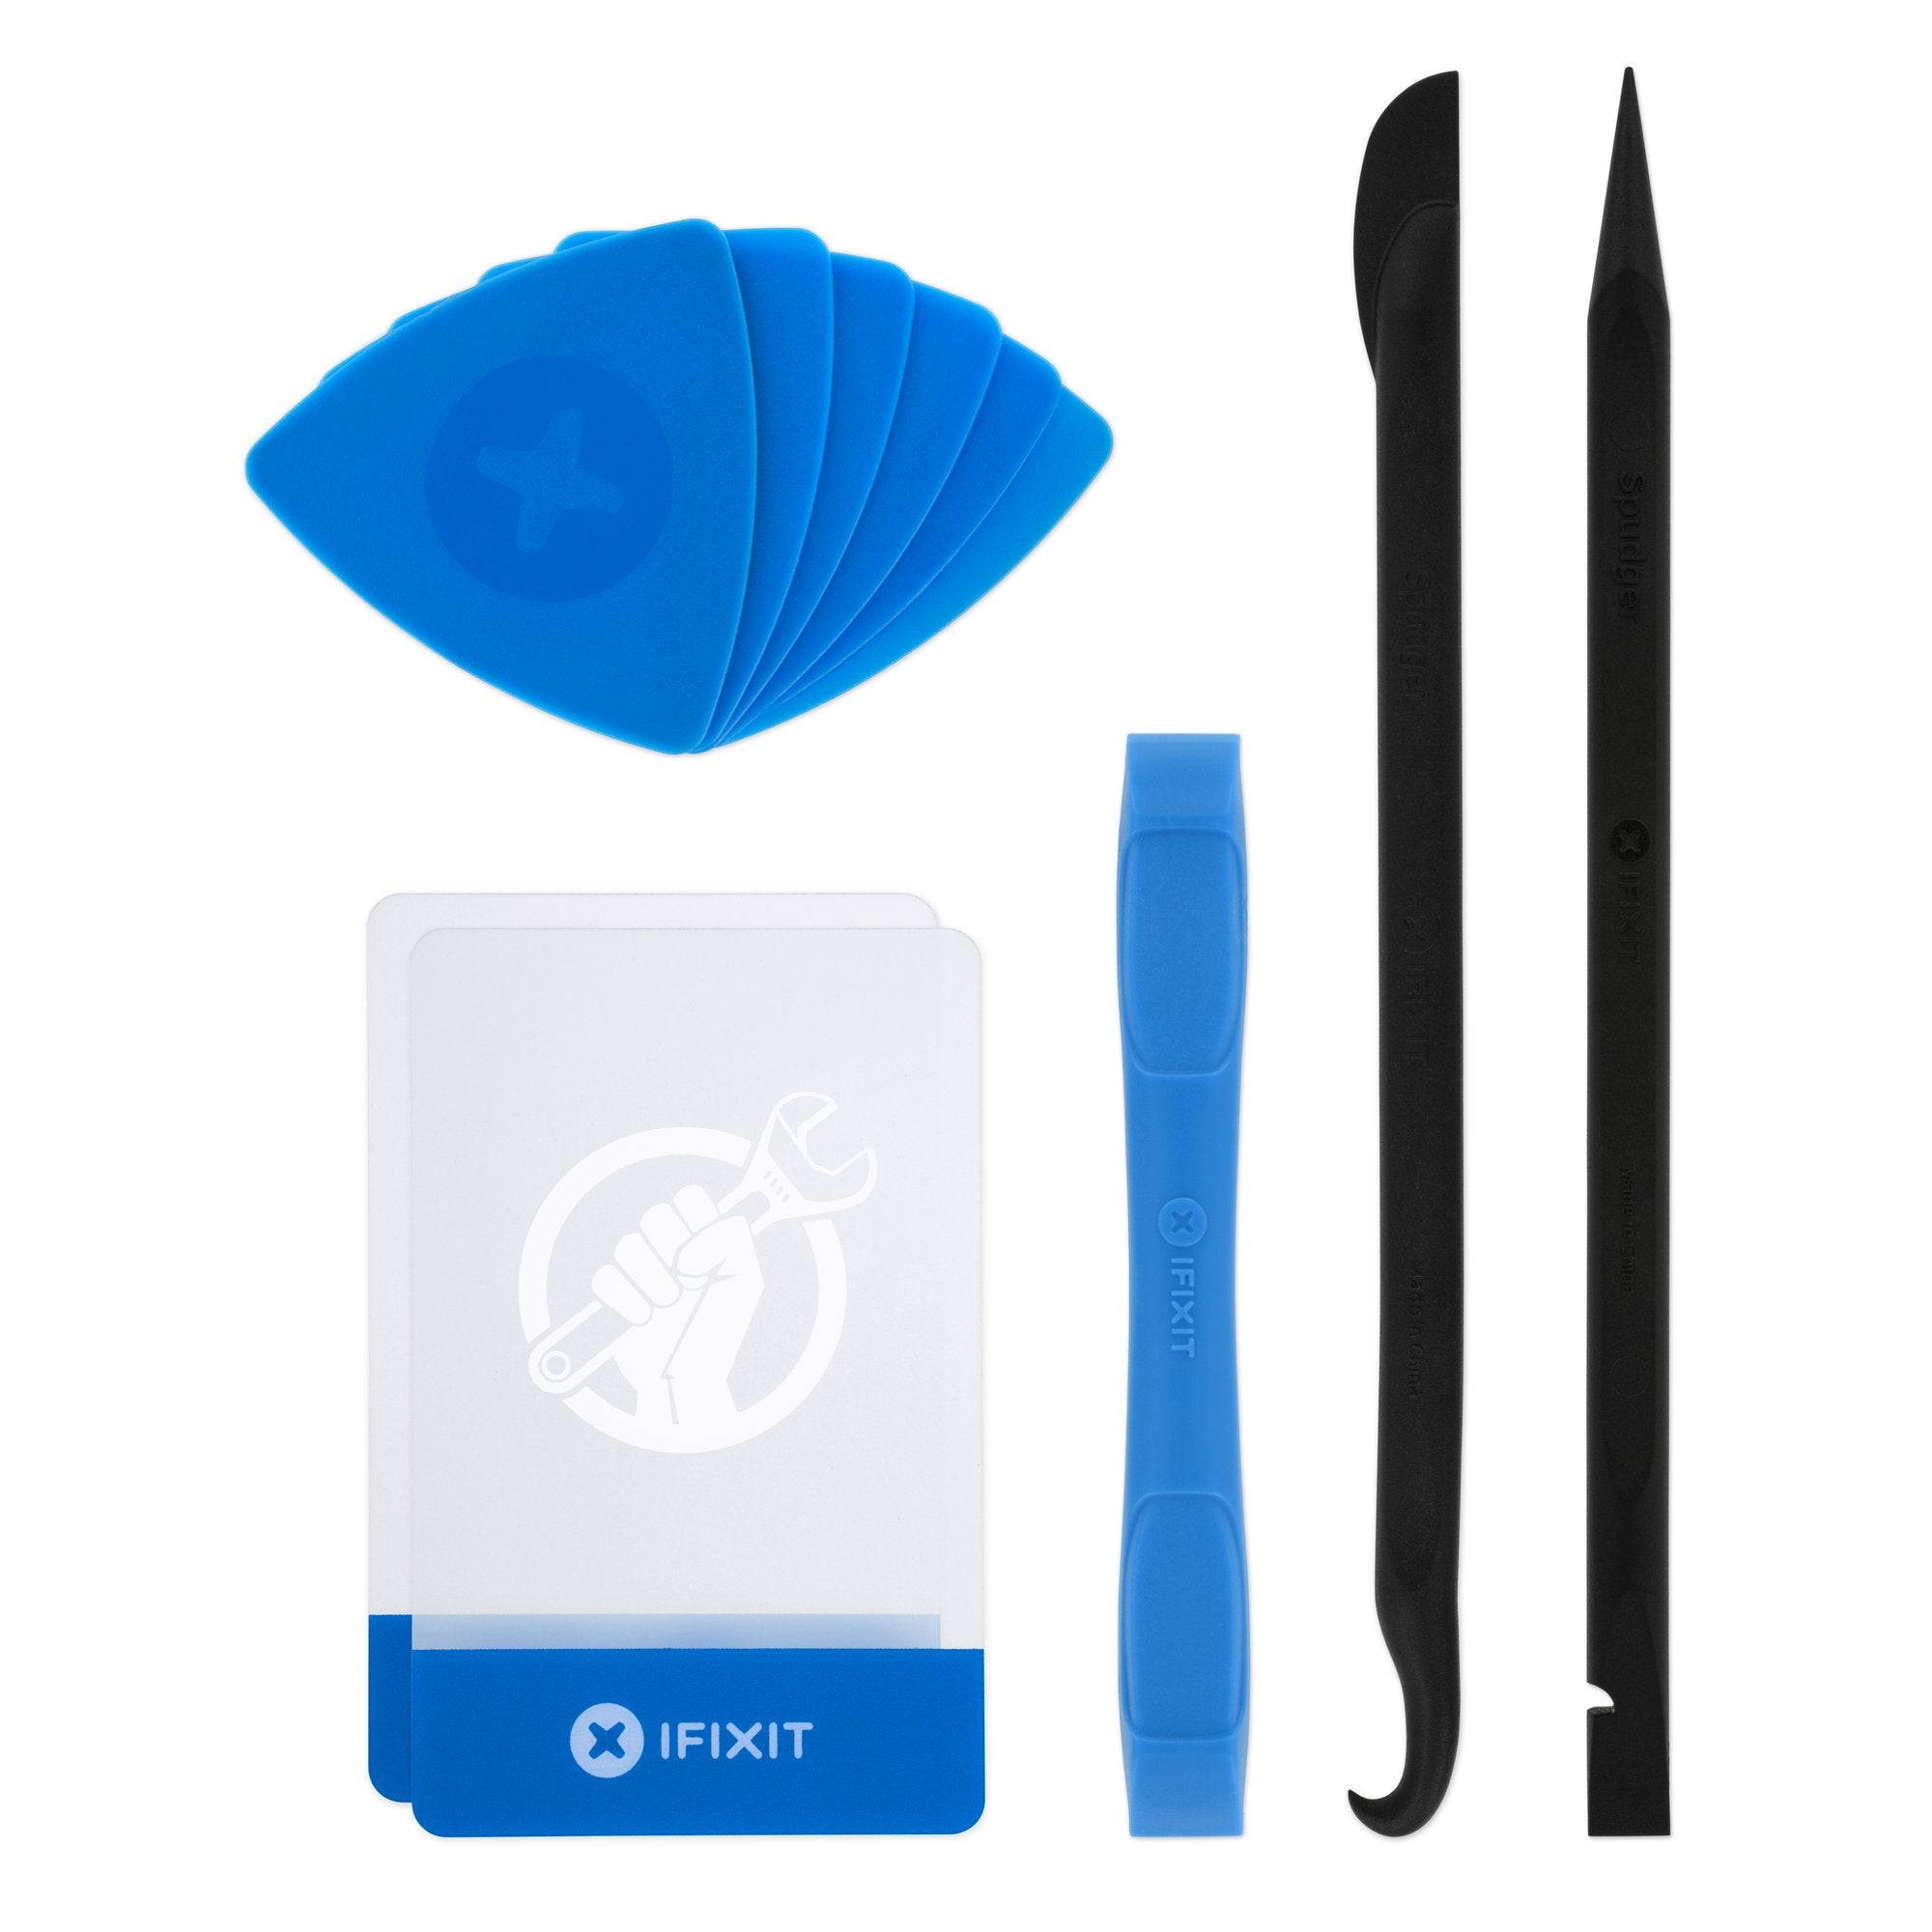 iFixit Prying and Opening Tool Assortment IF145-364-1 